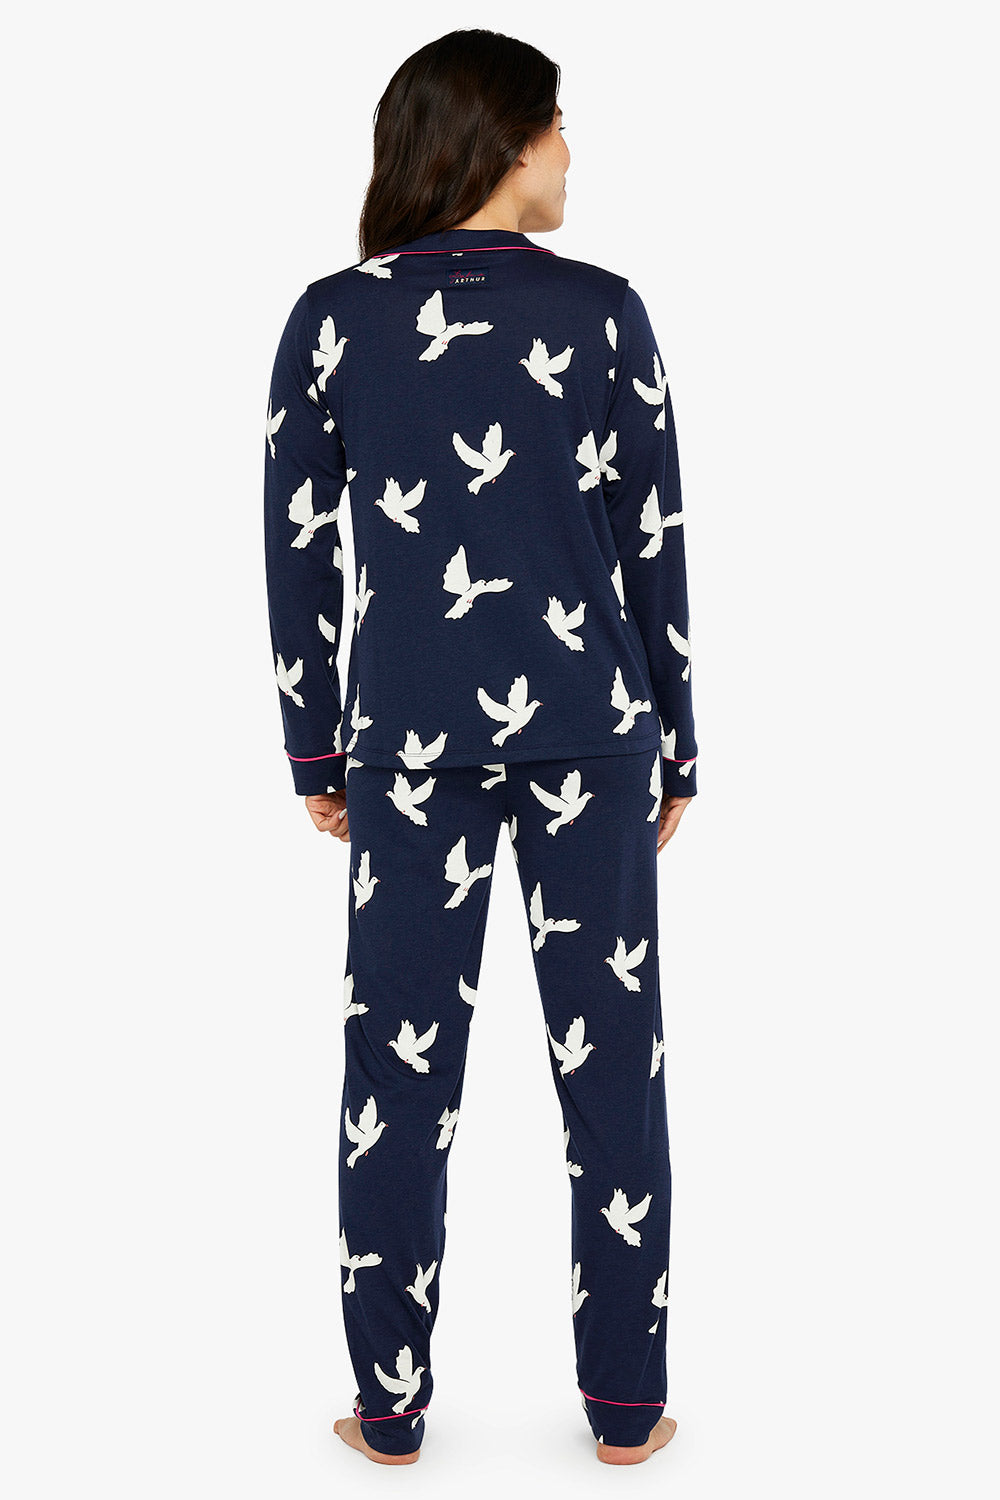 Doves Buttoned Pajamas